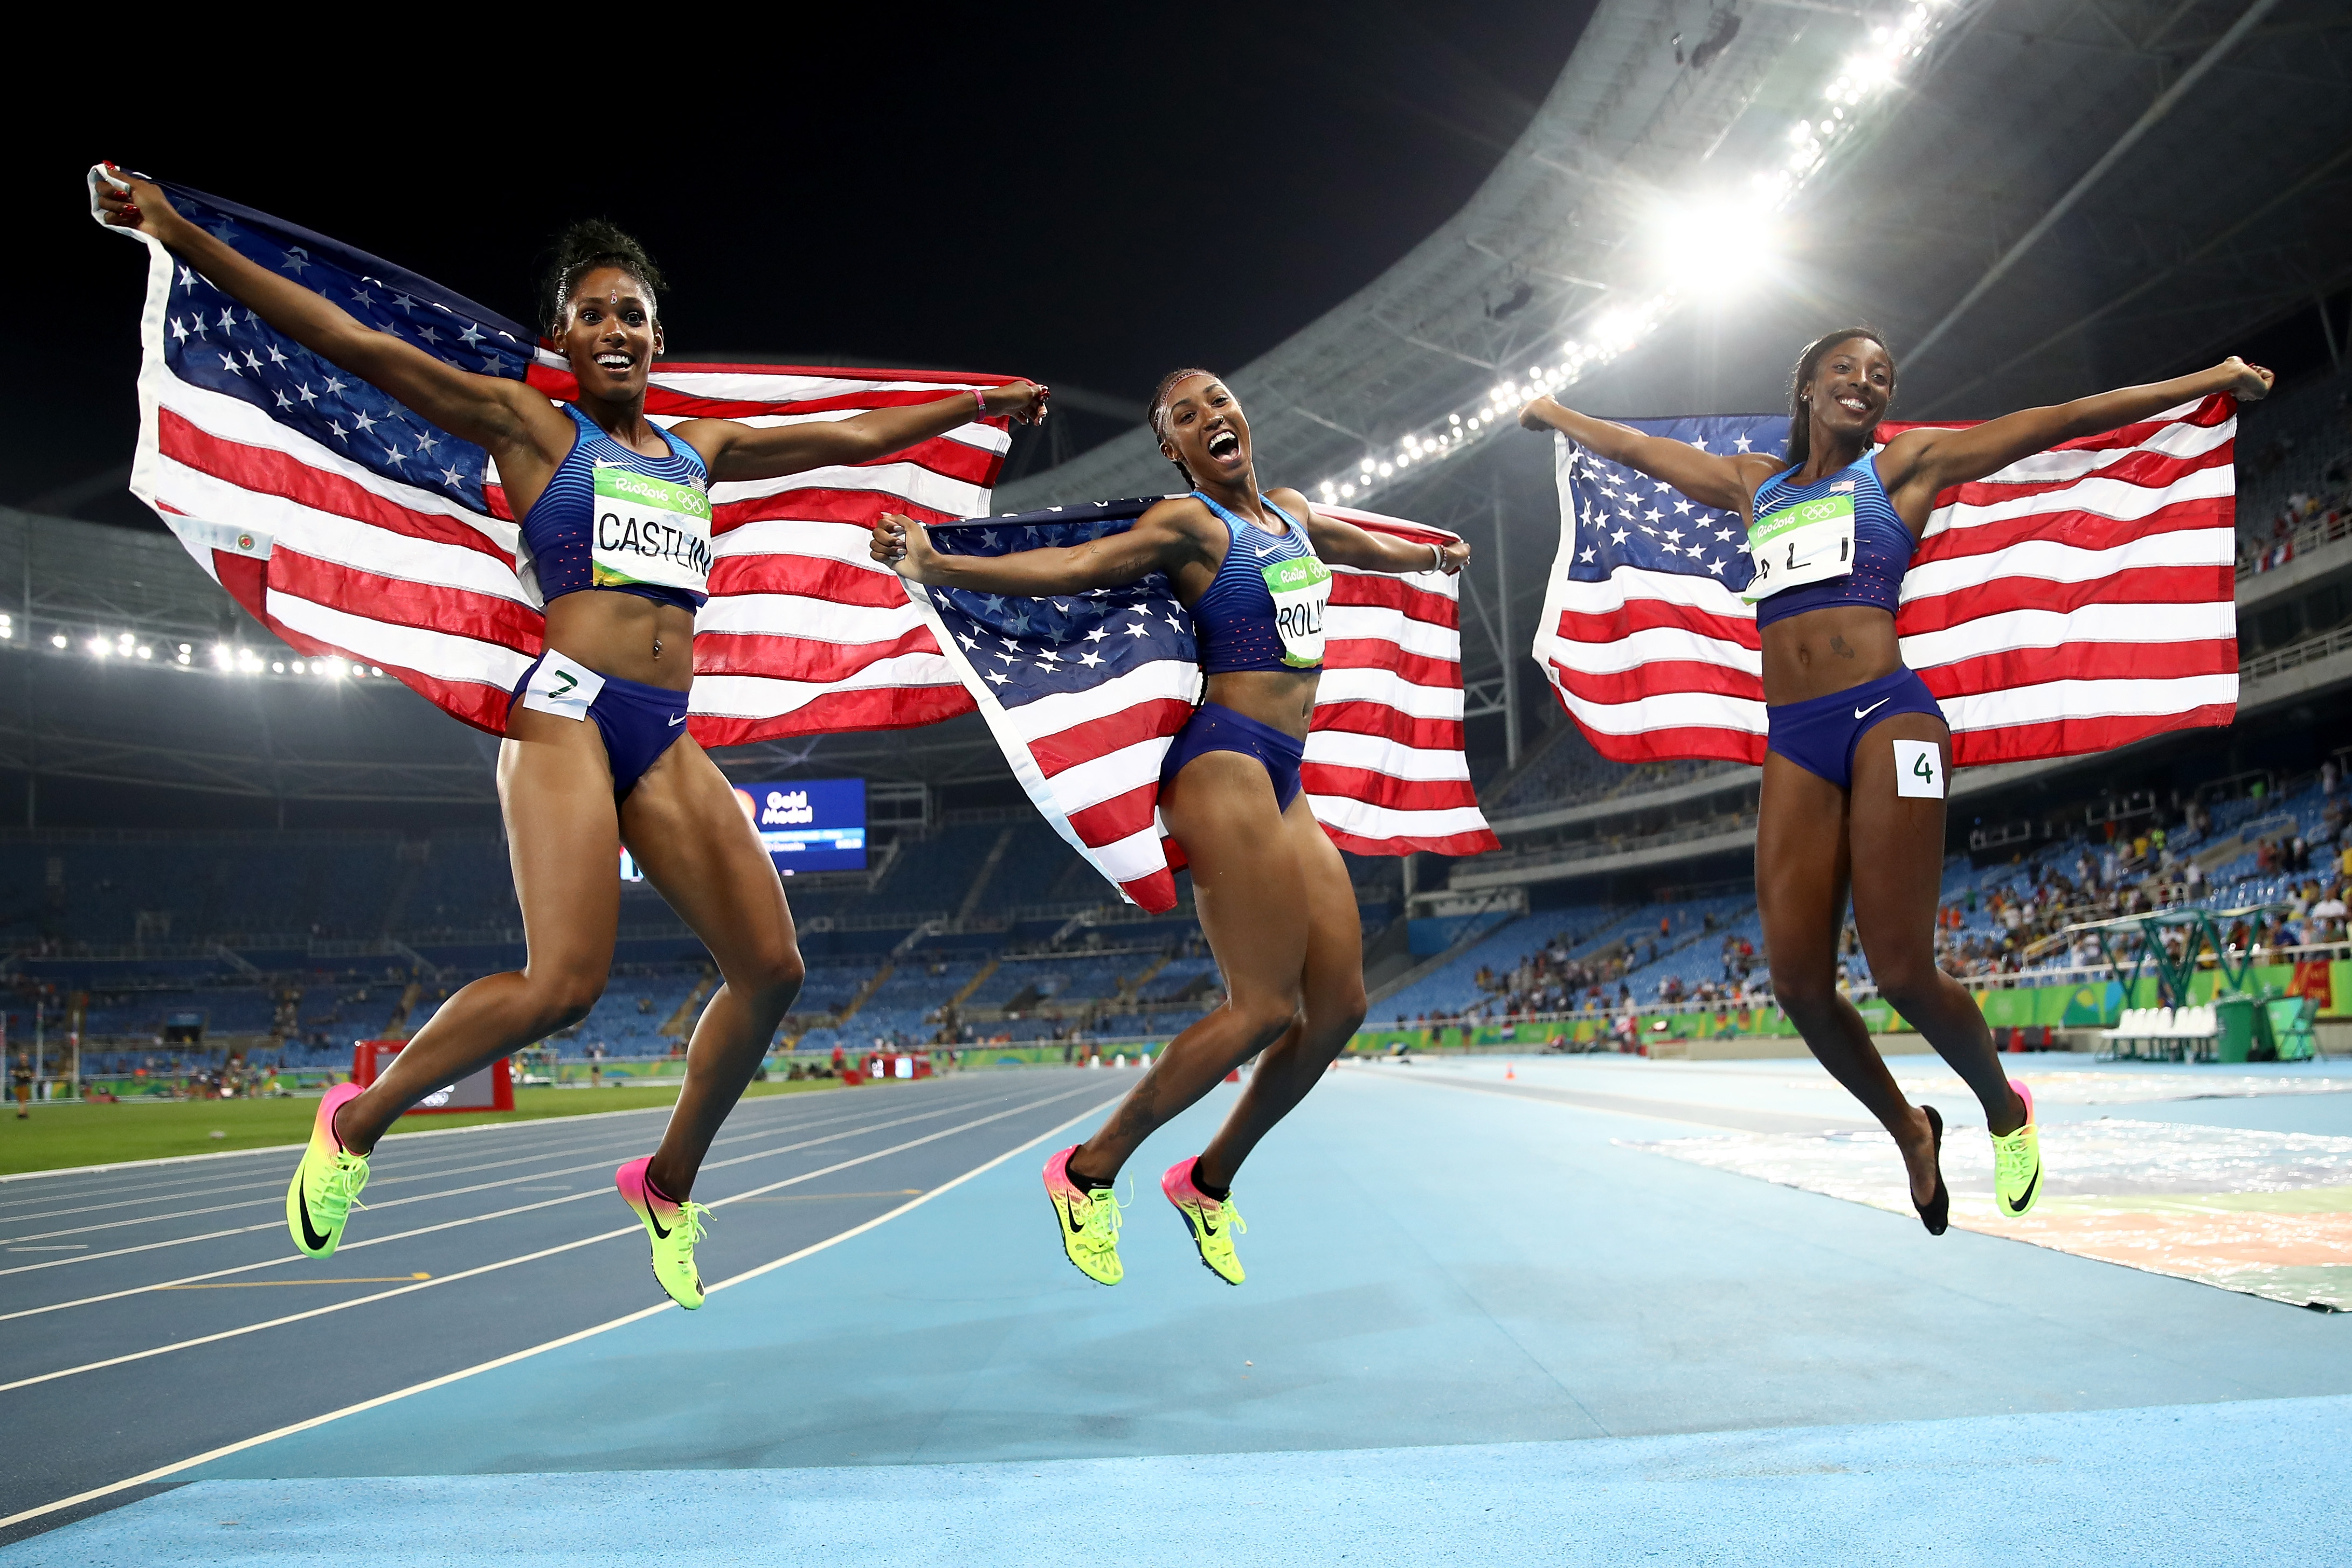 Bronze medalist Kristi Castlin, gold medalist Brianna Rollins and silver medalist Nia Ali of the United States after the Women's 100m Hurdles Final on Aug. 17, 2016 in Rio de Janeiro, Brazil. (Cameron Spencer—Getty Images)